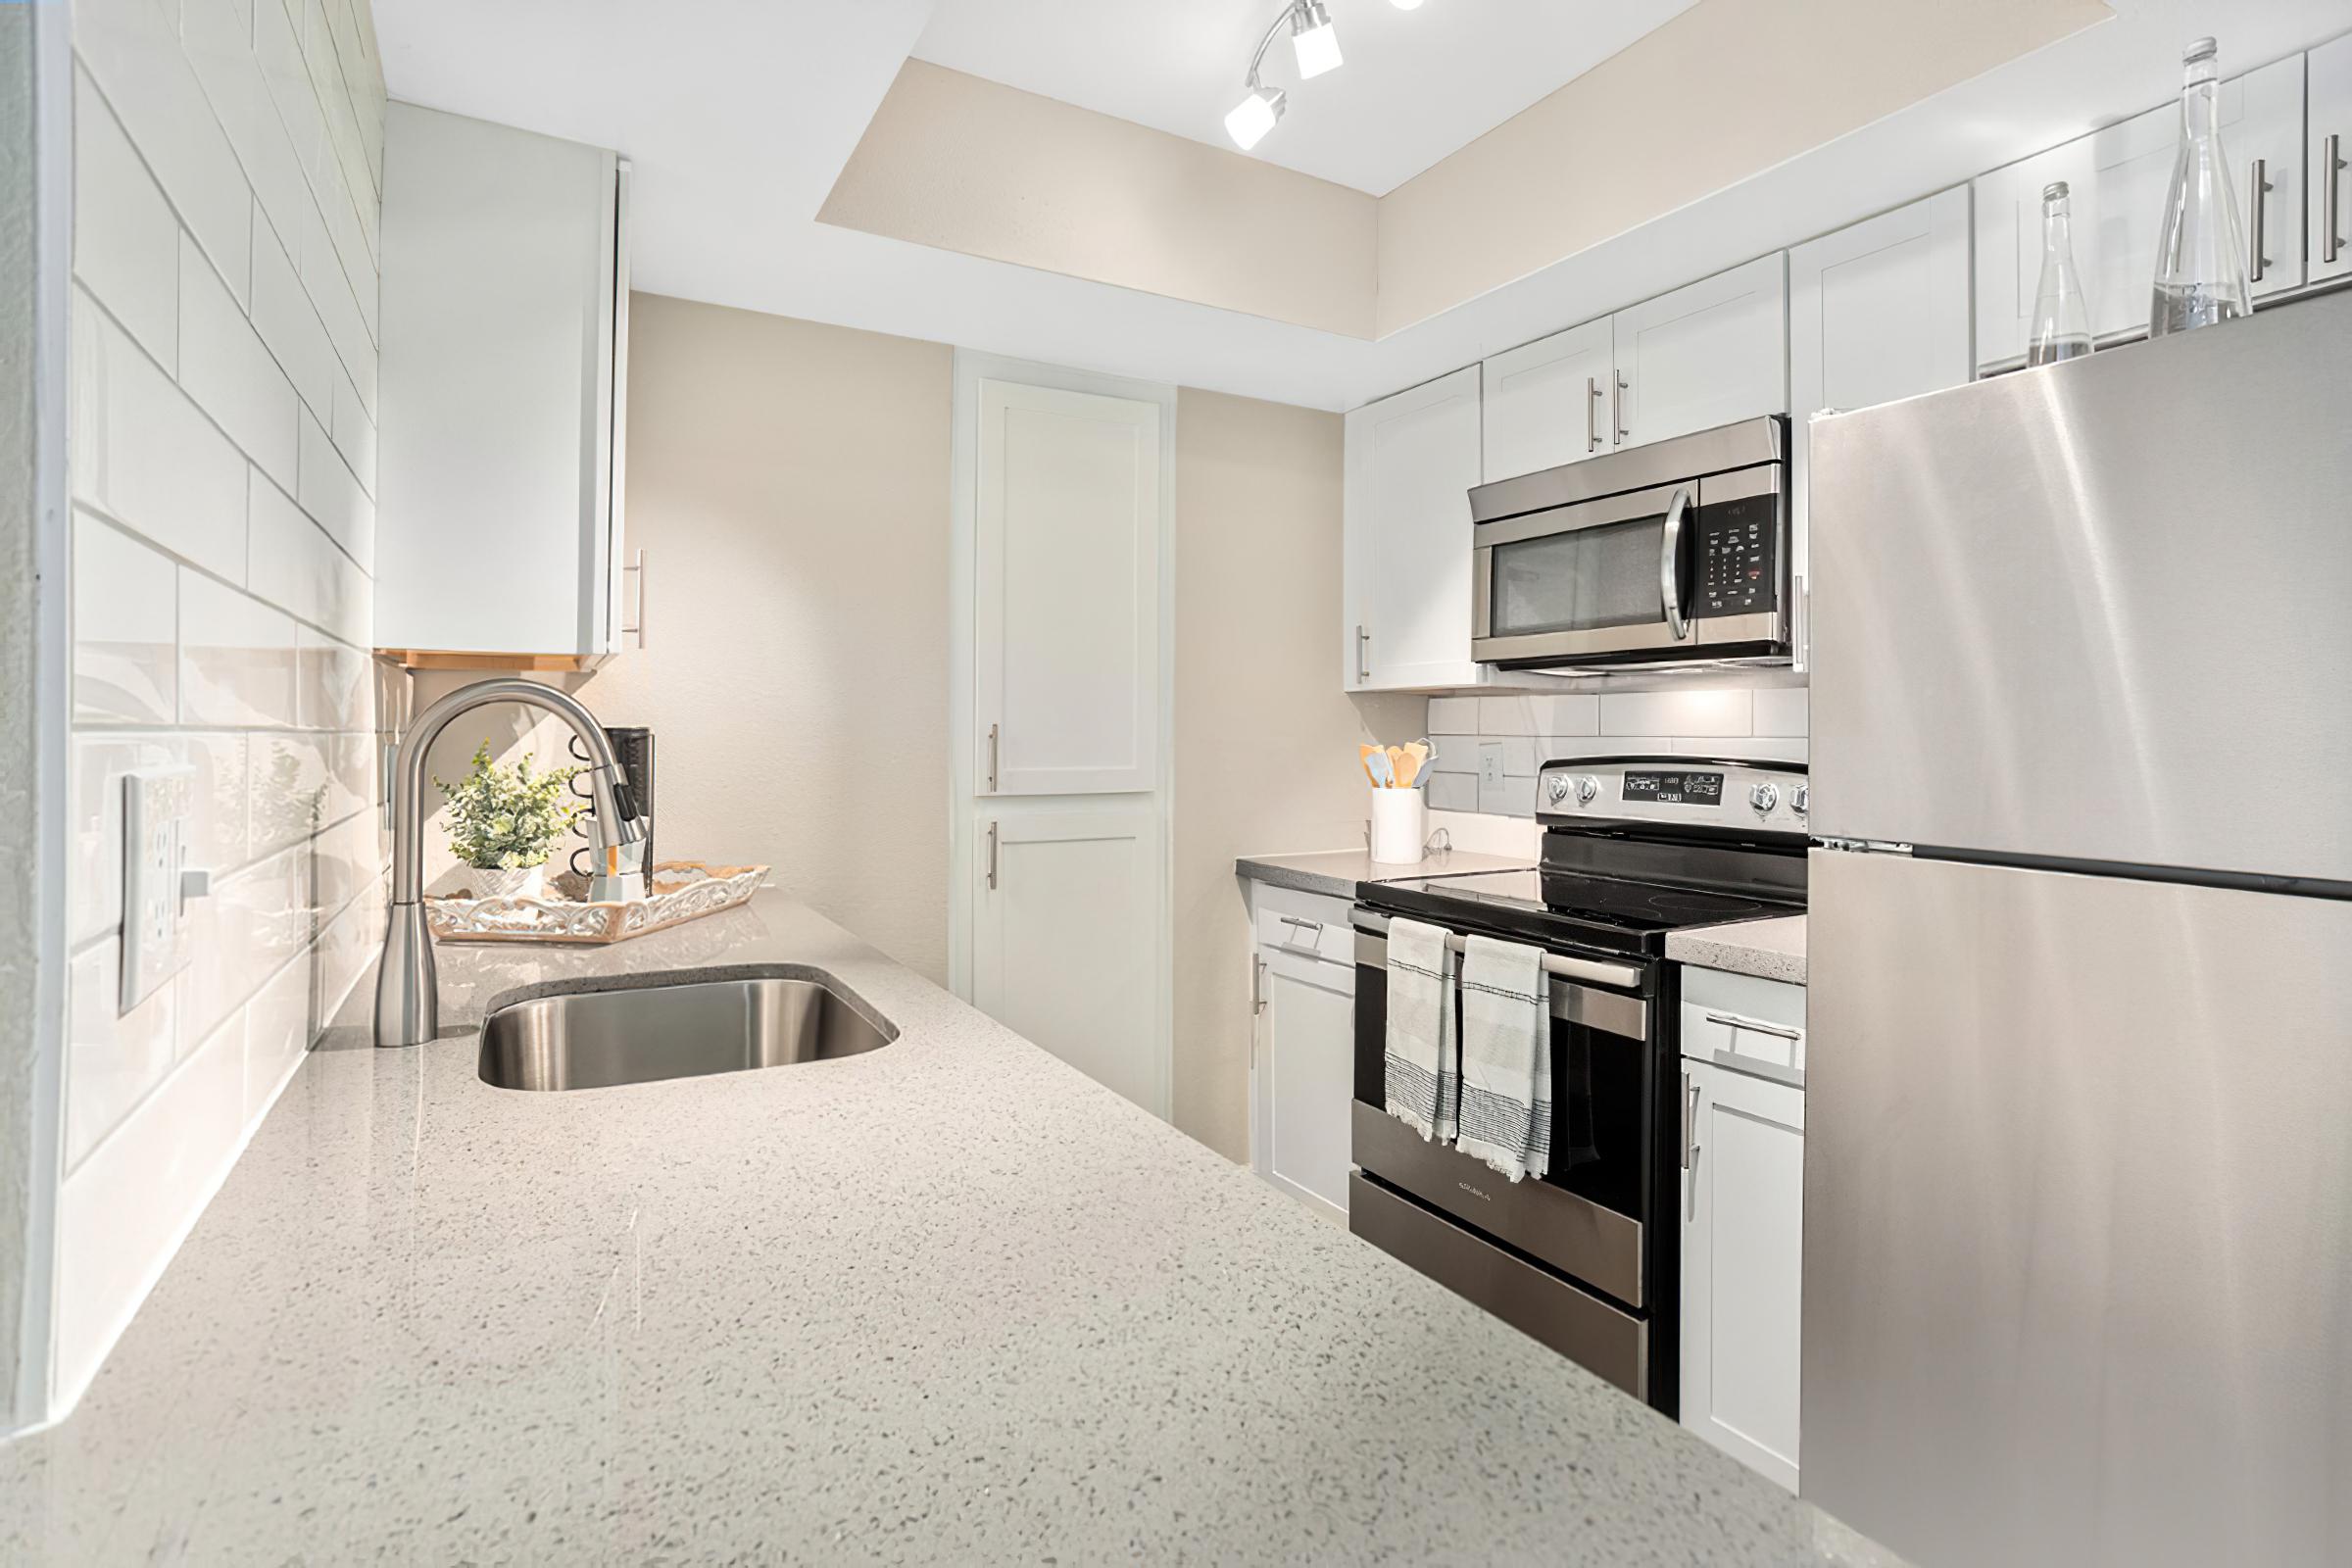 Renovated modern kitchen with stainless steel appliances, new quartz counters, and white cabinets